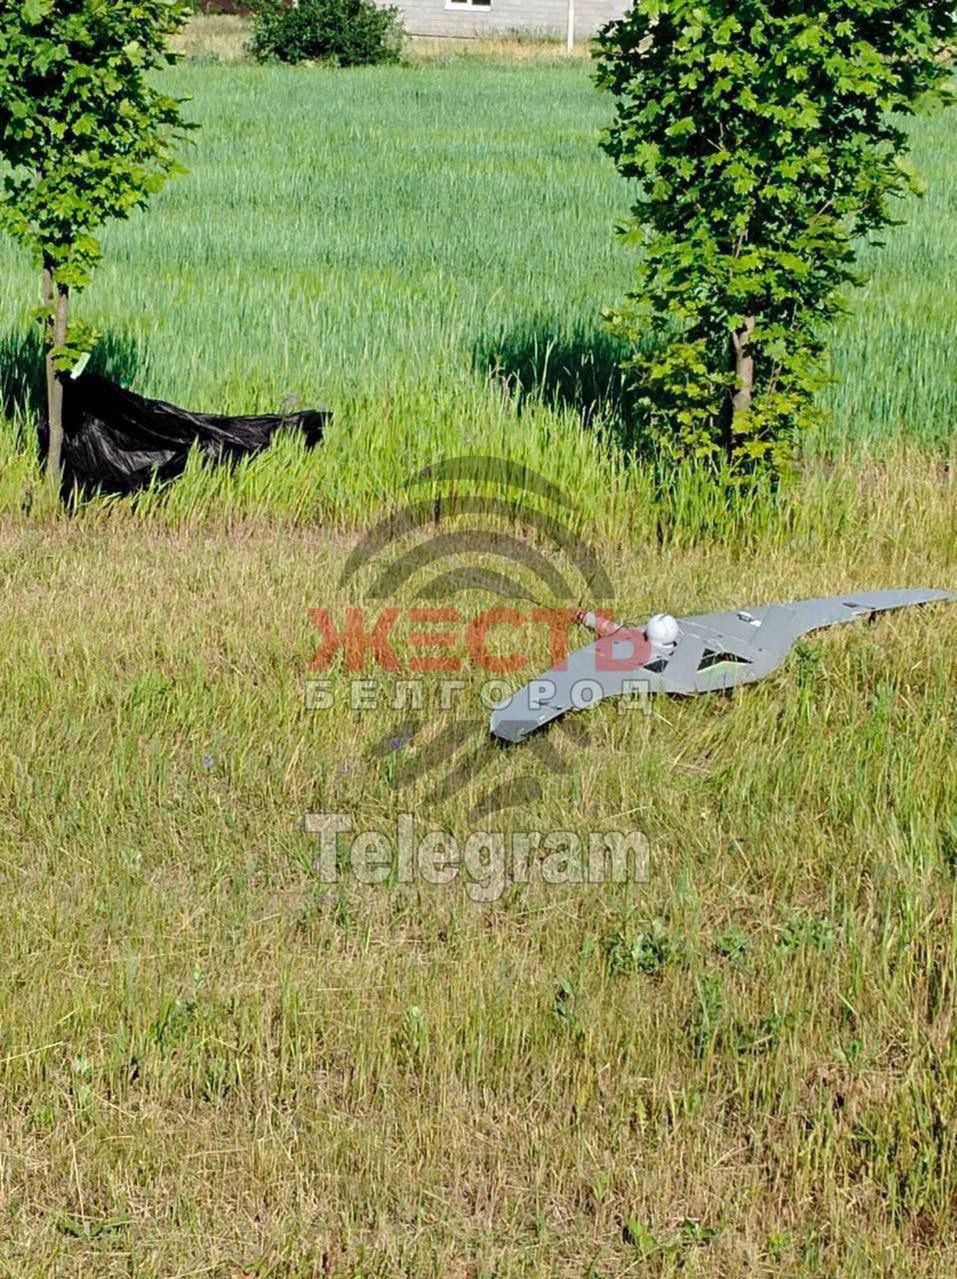 Russian forces mistakenly down own Supercam drone near the Ukraine border